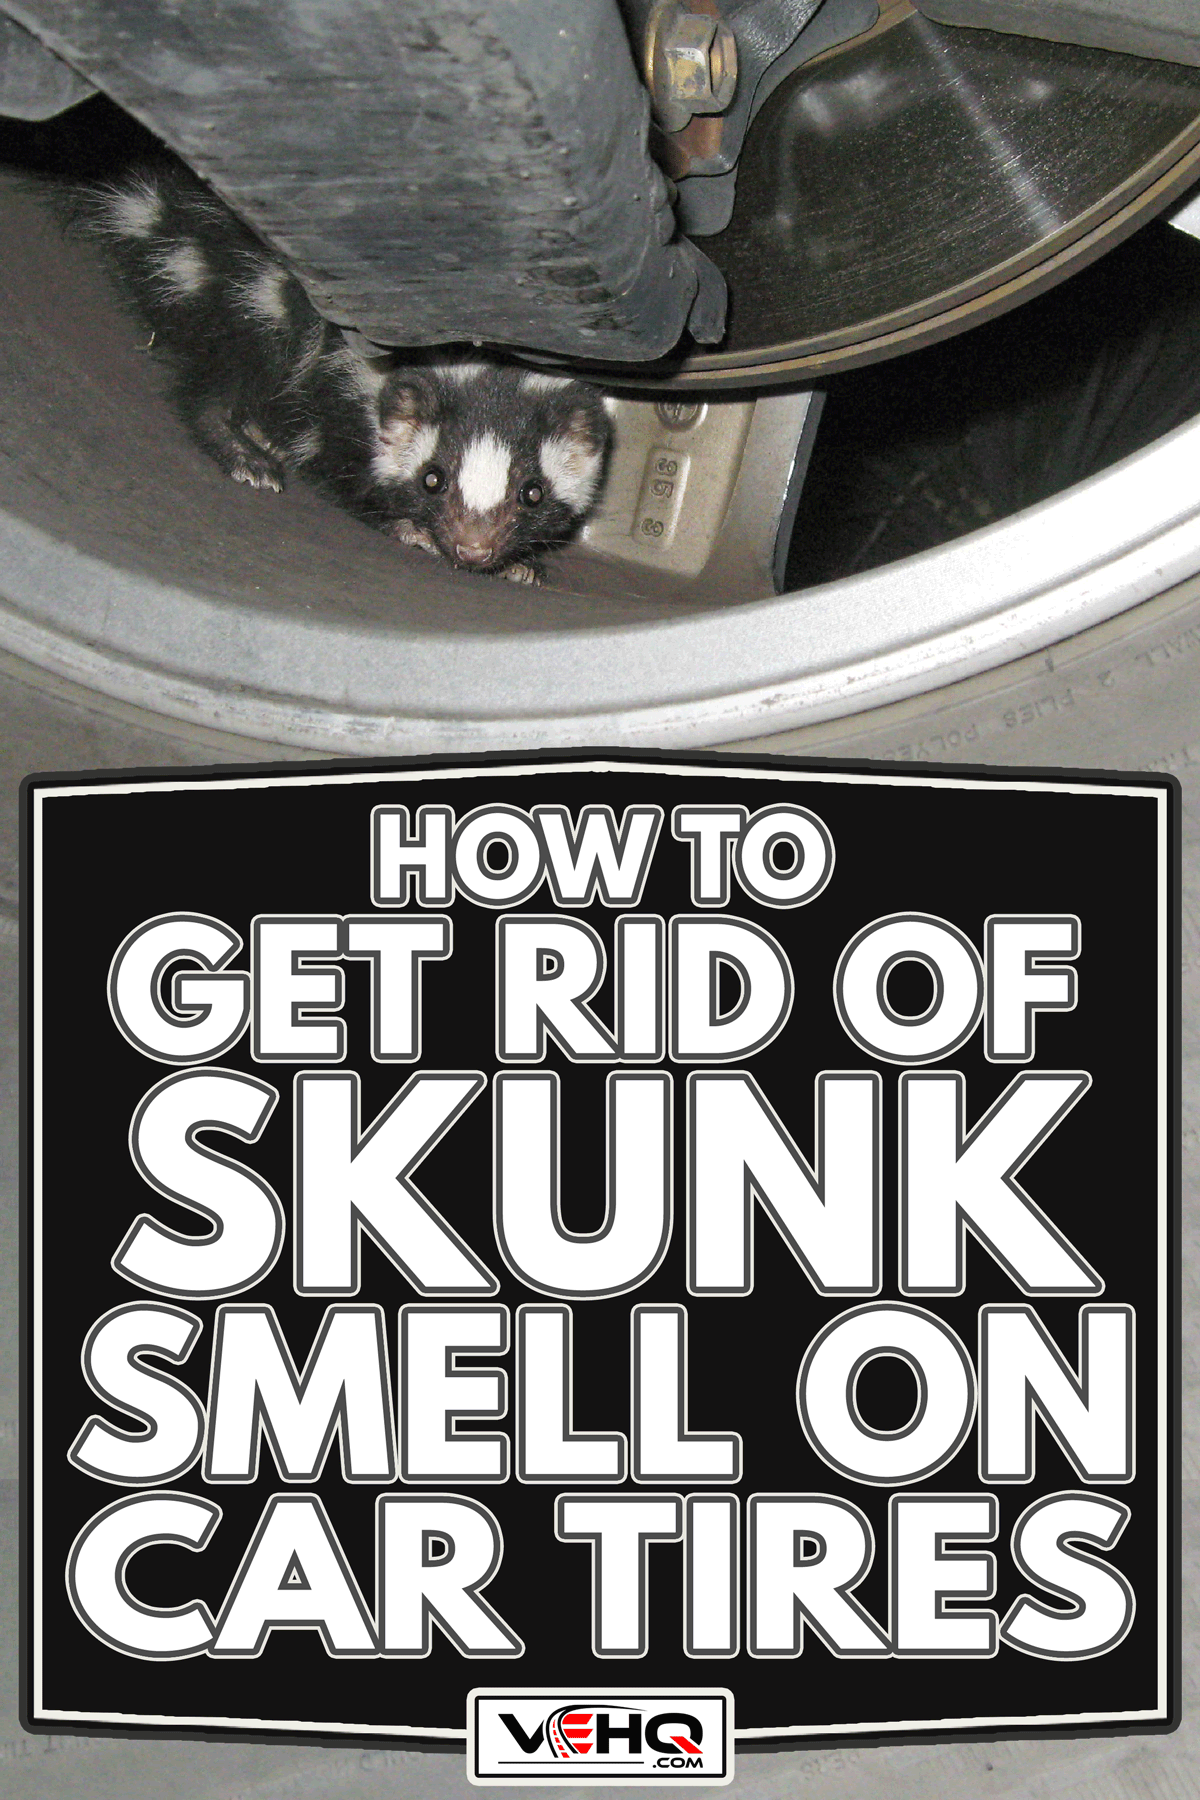 How To Get Rid Of Skunk Smell On Car Tires